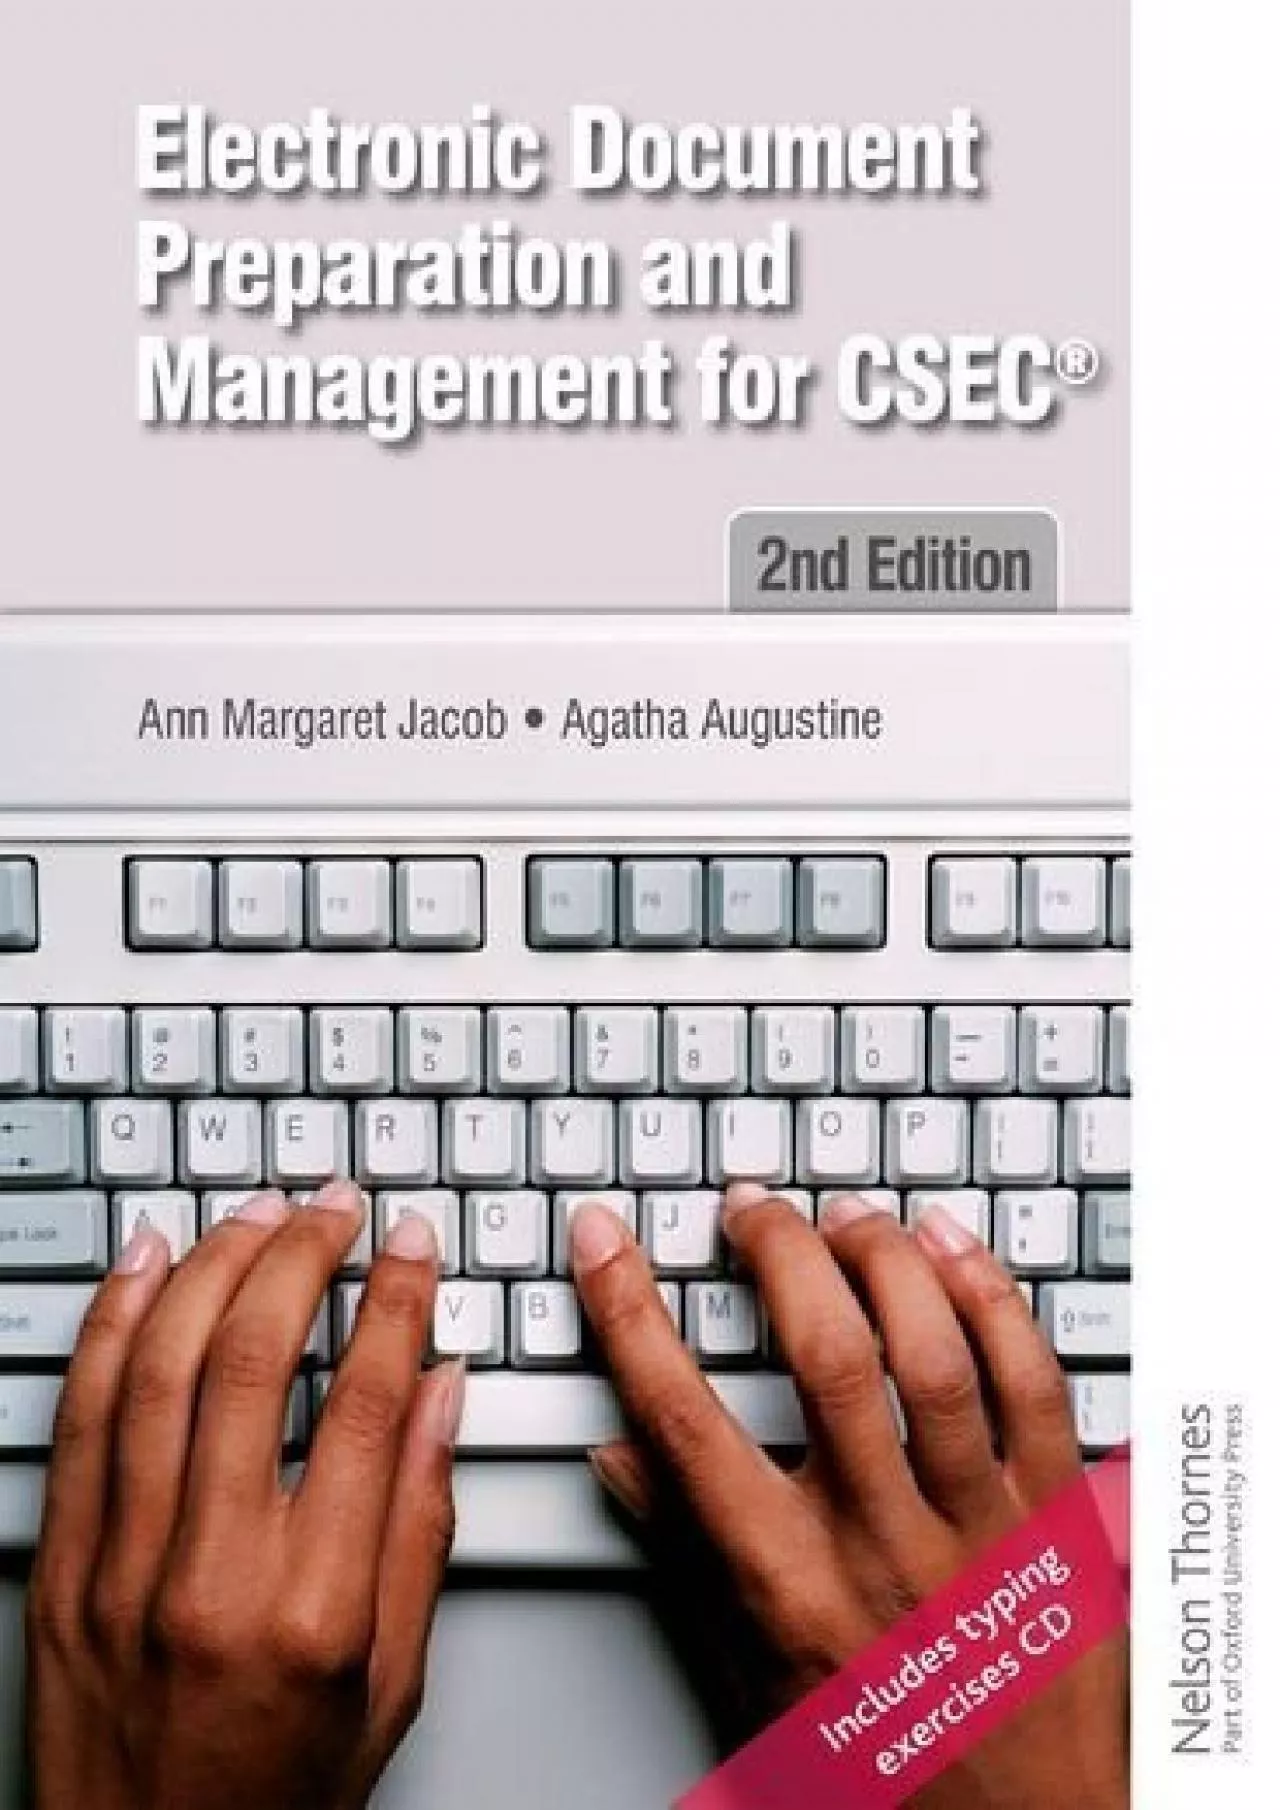 (DOWNLOAD)-Electronic Document Preparation and Management for CSEC 2nd Edition by Ann-Margaret